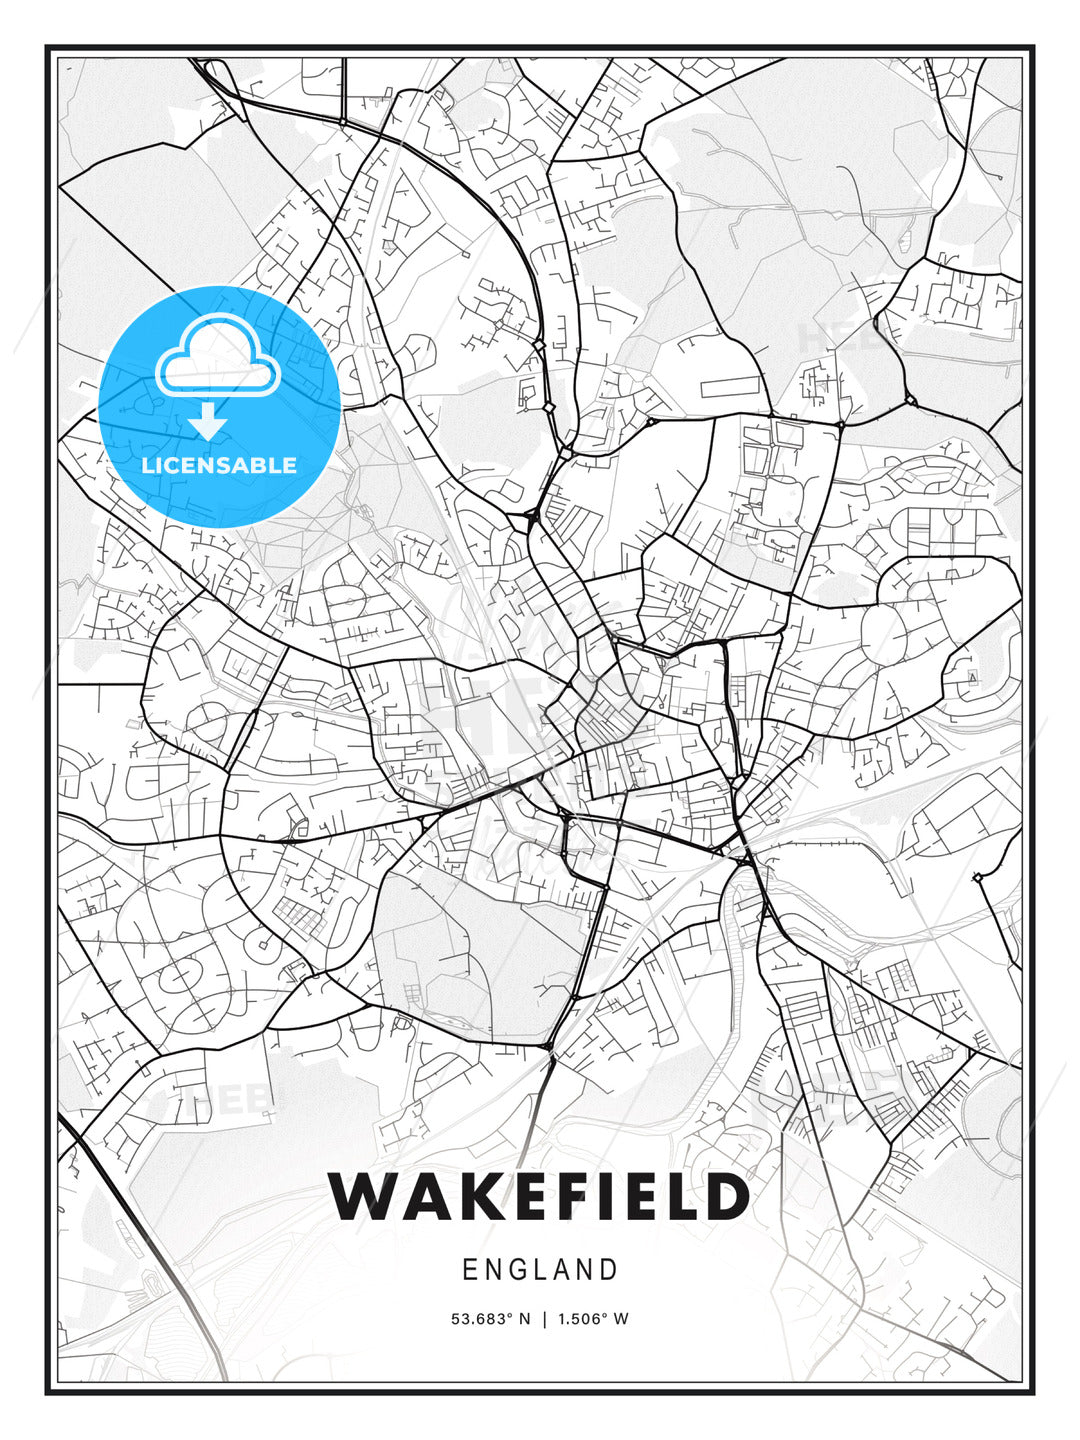 Wakefield, England, Modern Print Template in Various Formats - HEBSTREITS Sketches